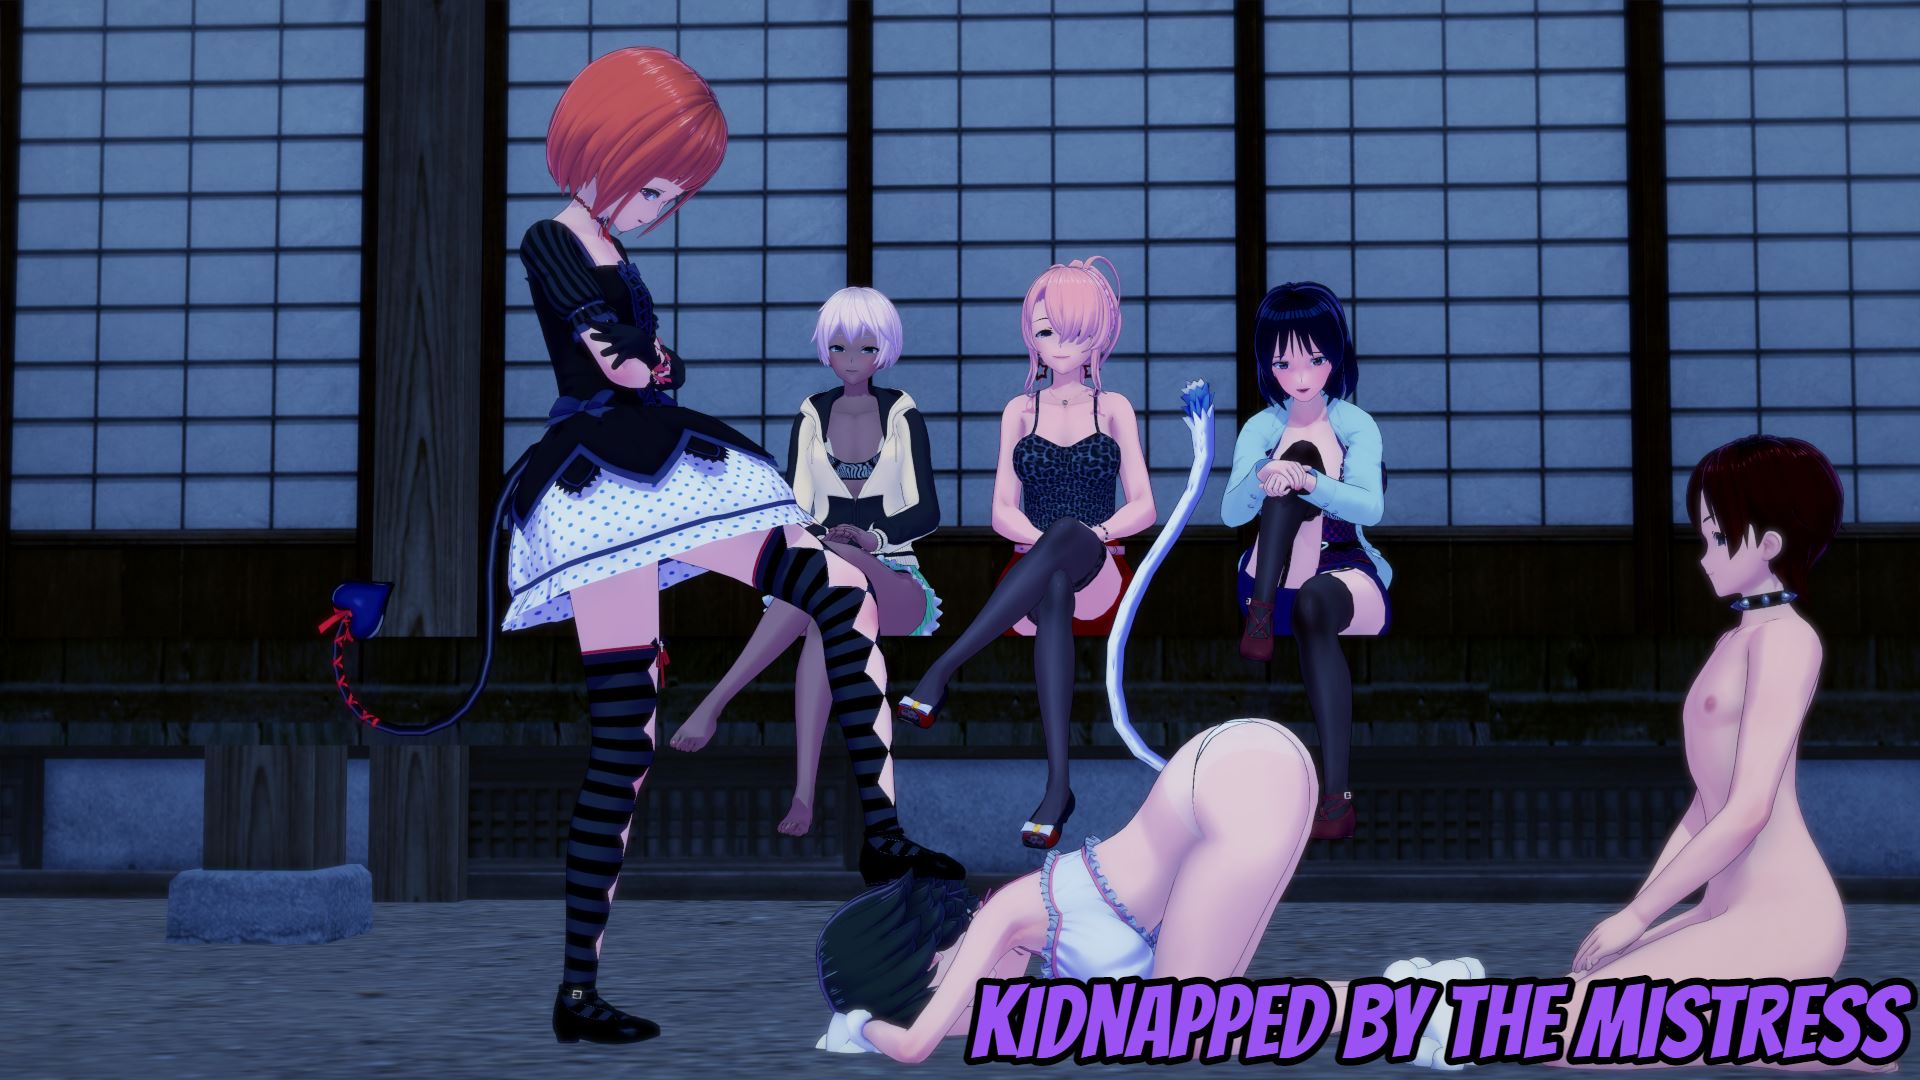 Kidnapped by the Mistress [Ongoing] - Version: 0.8